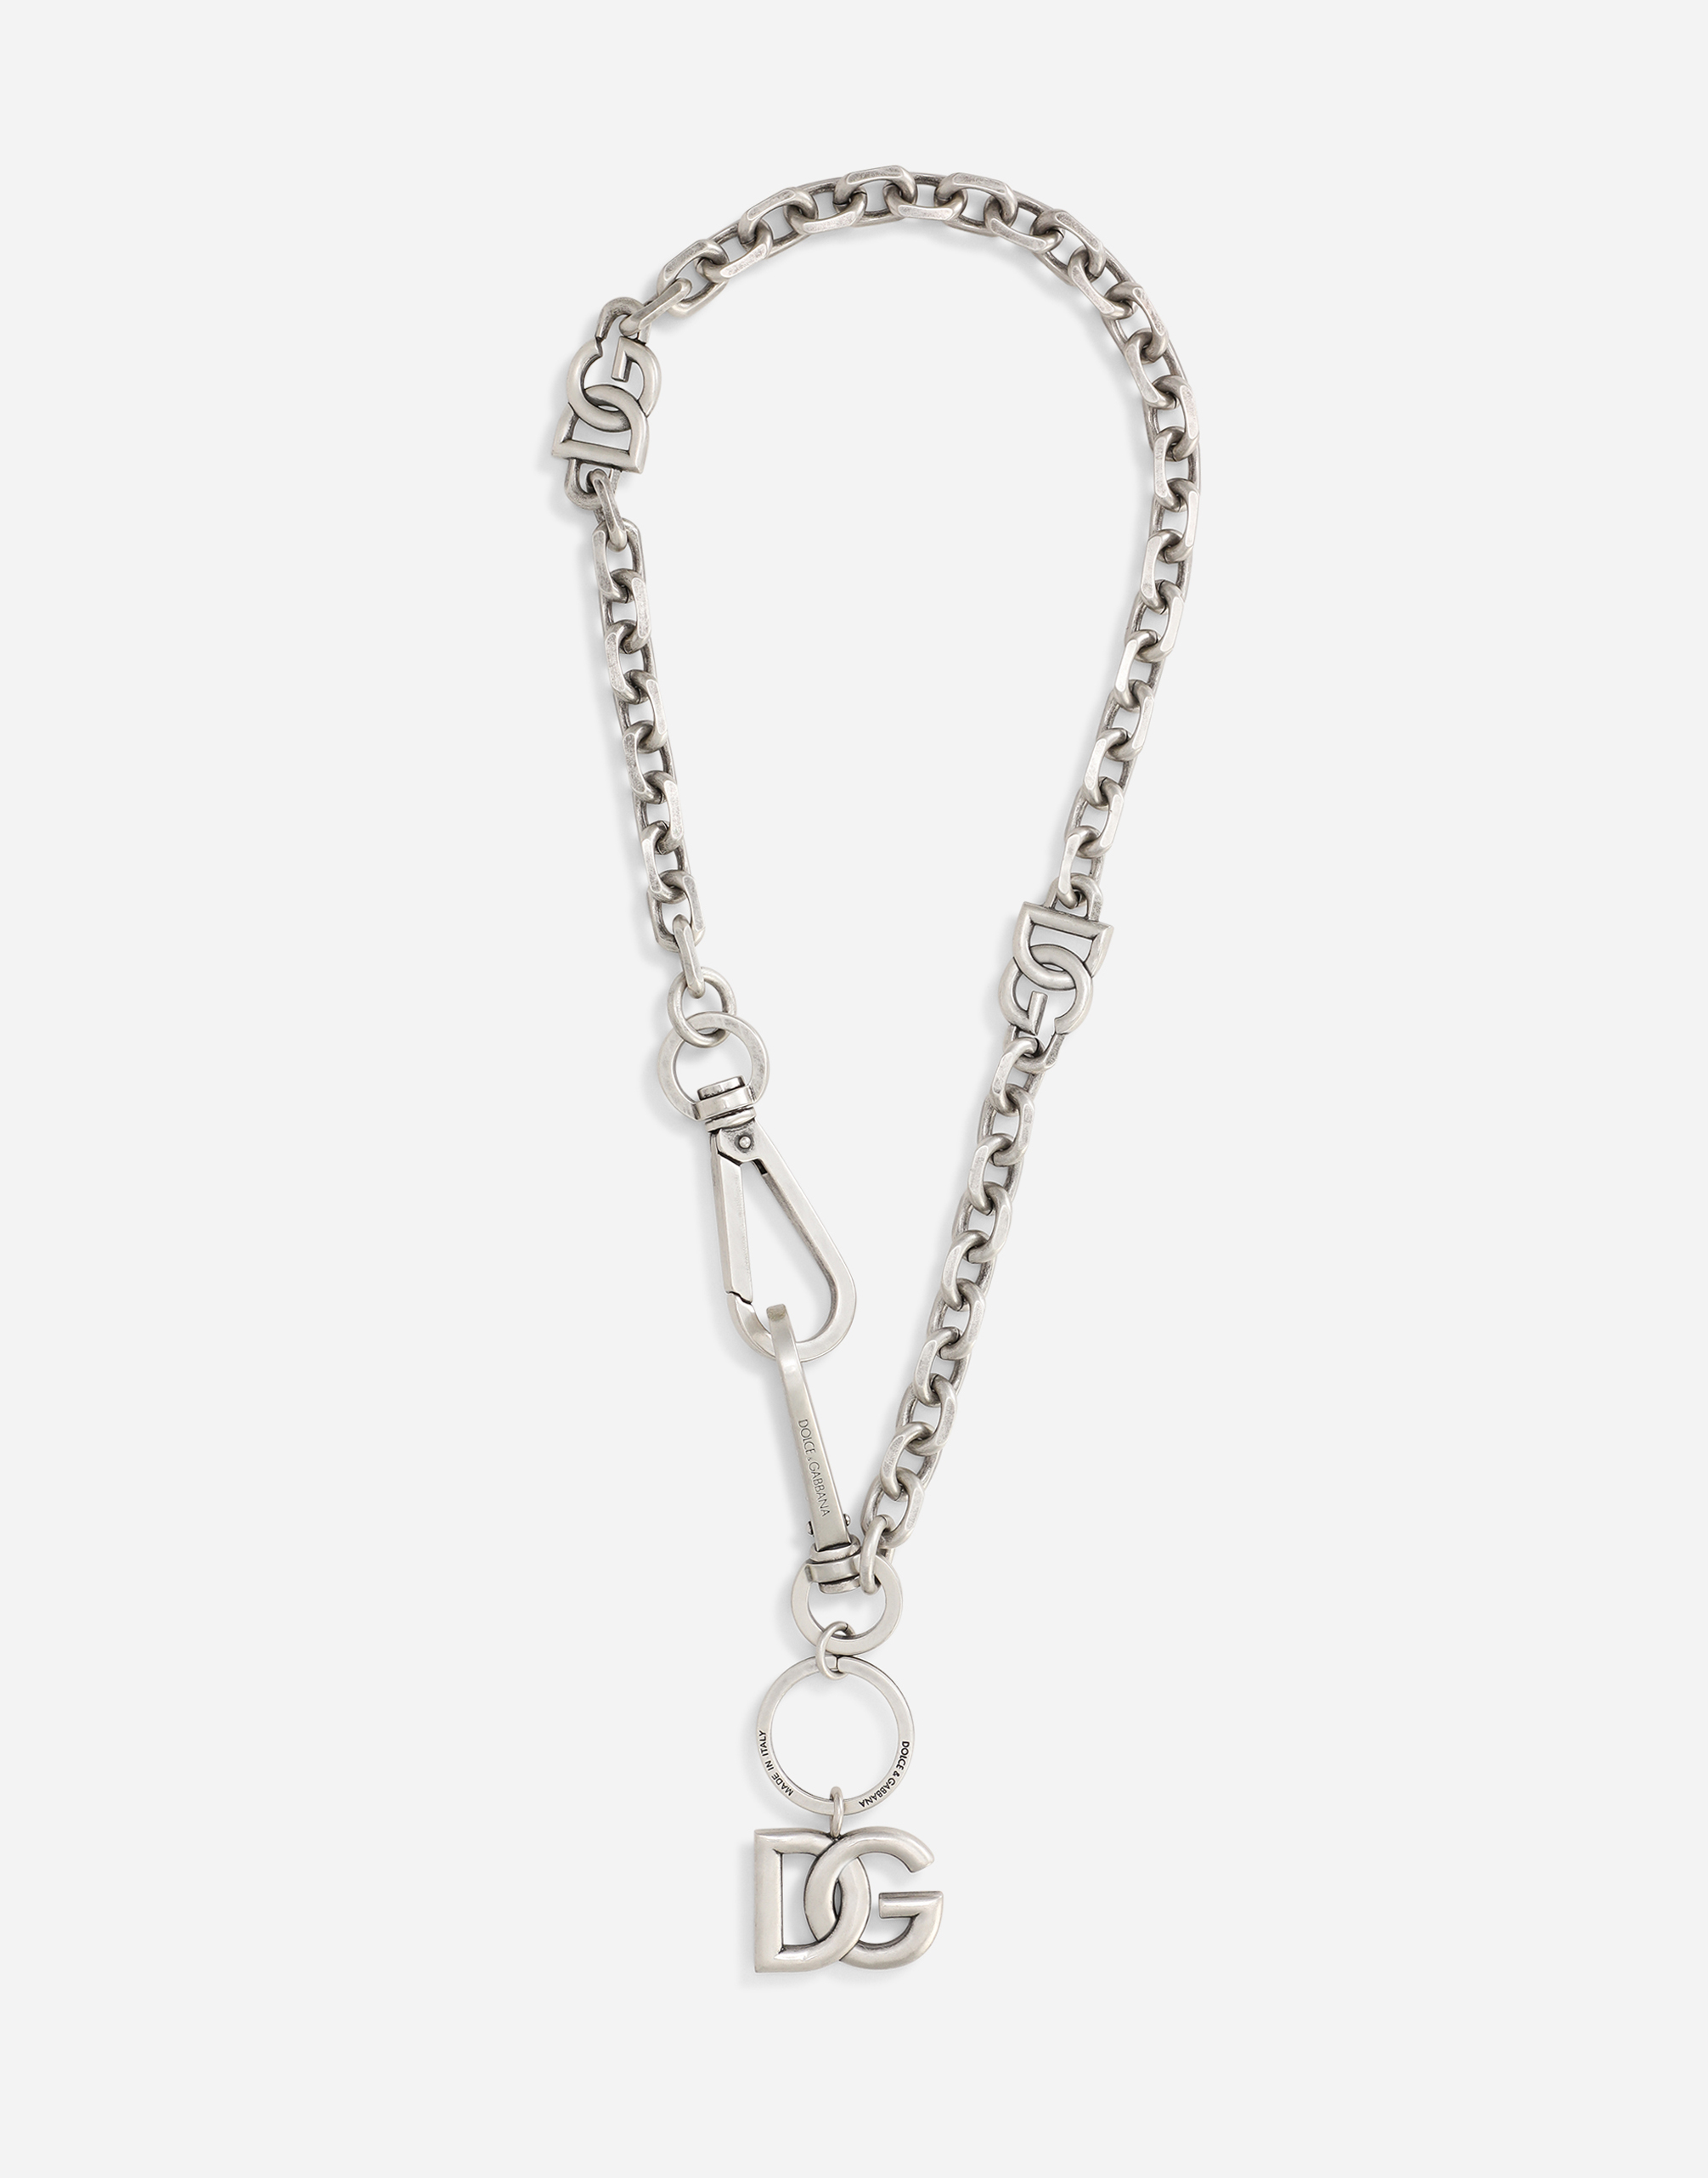 Mens Jewellery Necklaces Save 25% Dolce & Gabbana Silver Tone Metal Chain Dg Logo Keychain in Metallic for Men 